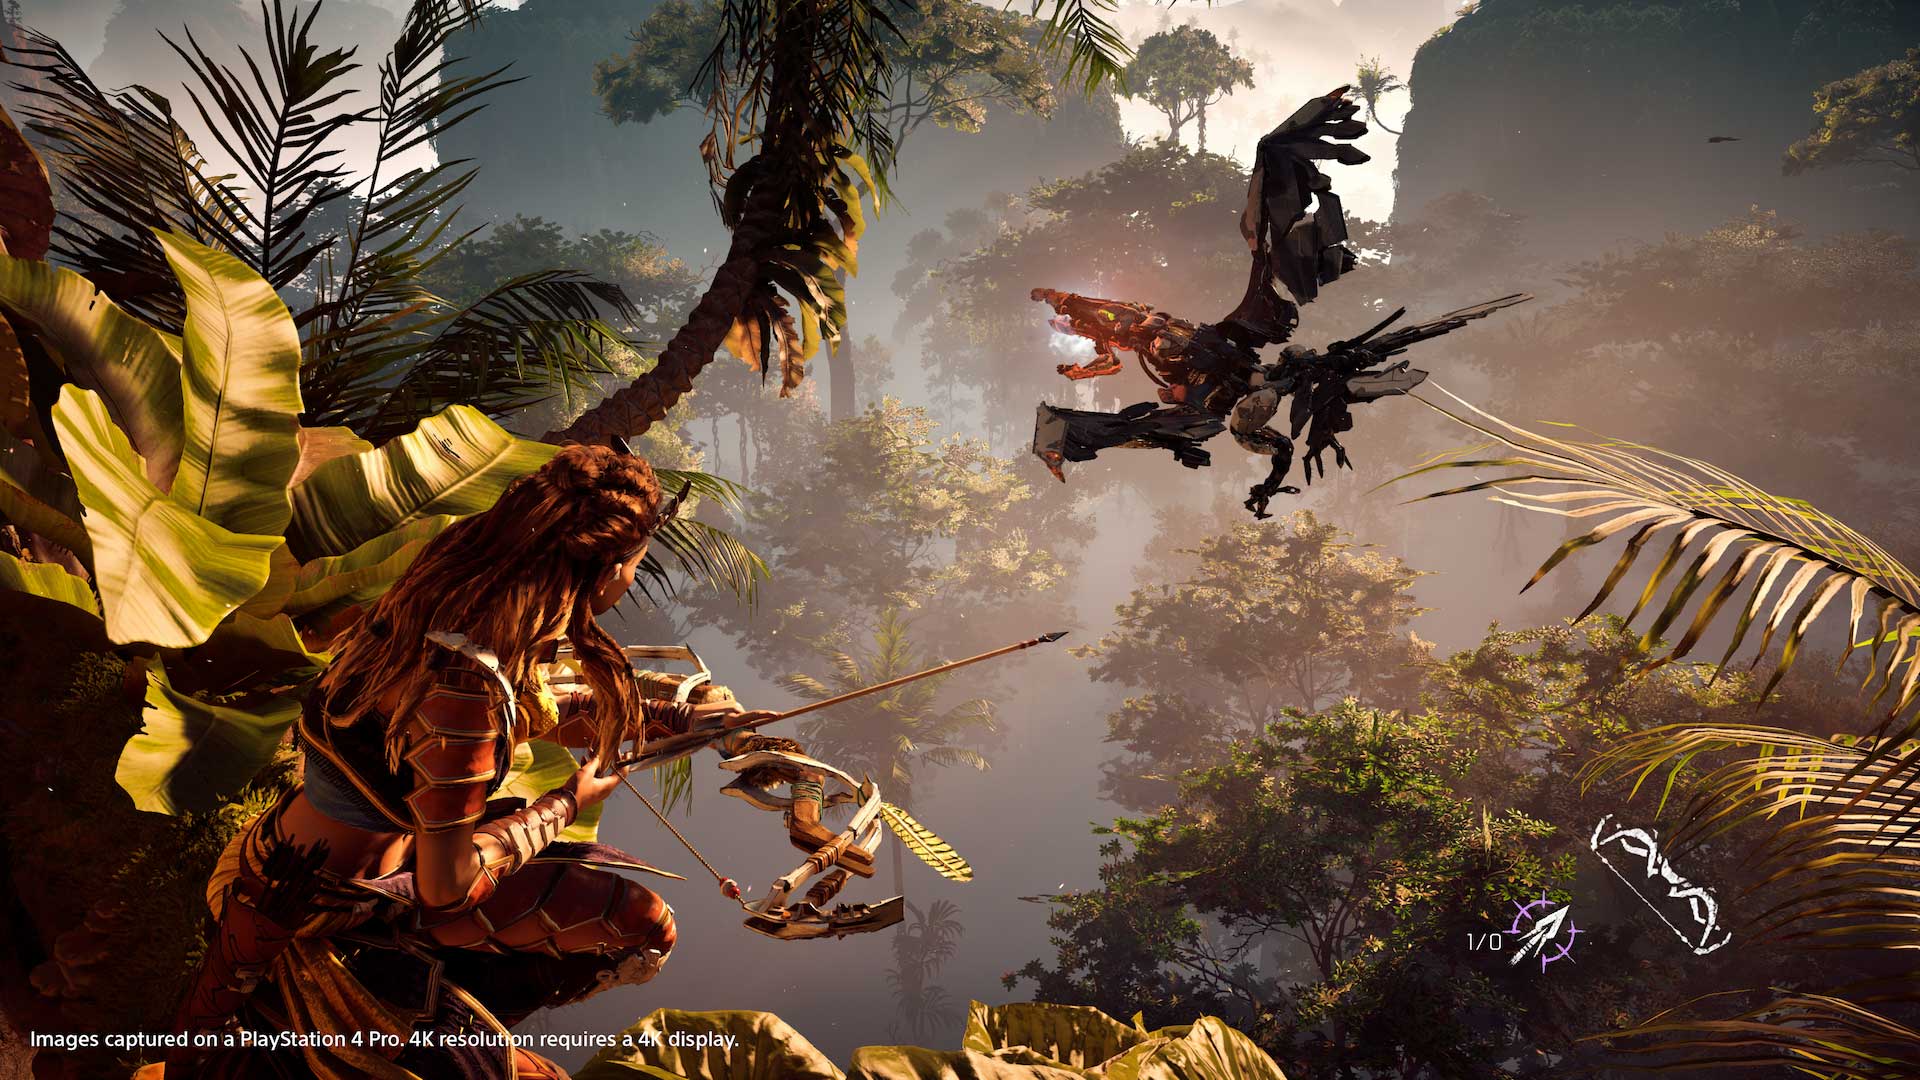 Image for PS4 Pro and an HDR display will make Horizon: Zero Dawn even more beautiful - check out these screens and tech babble